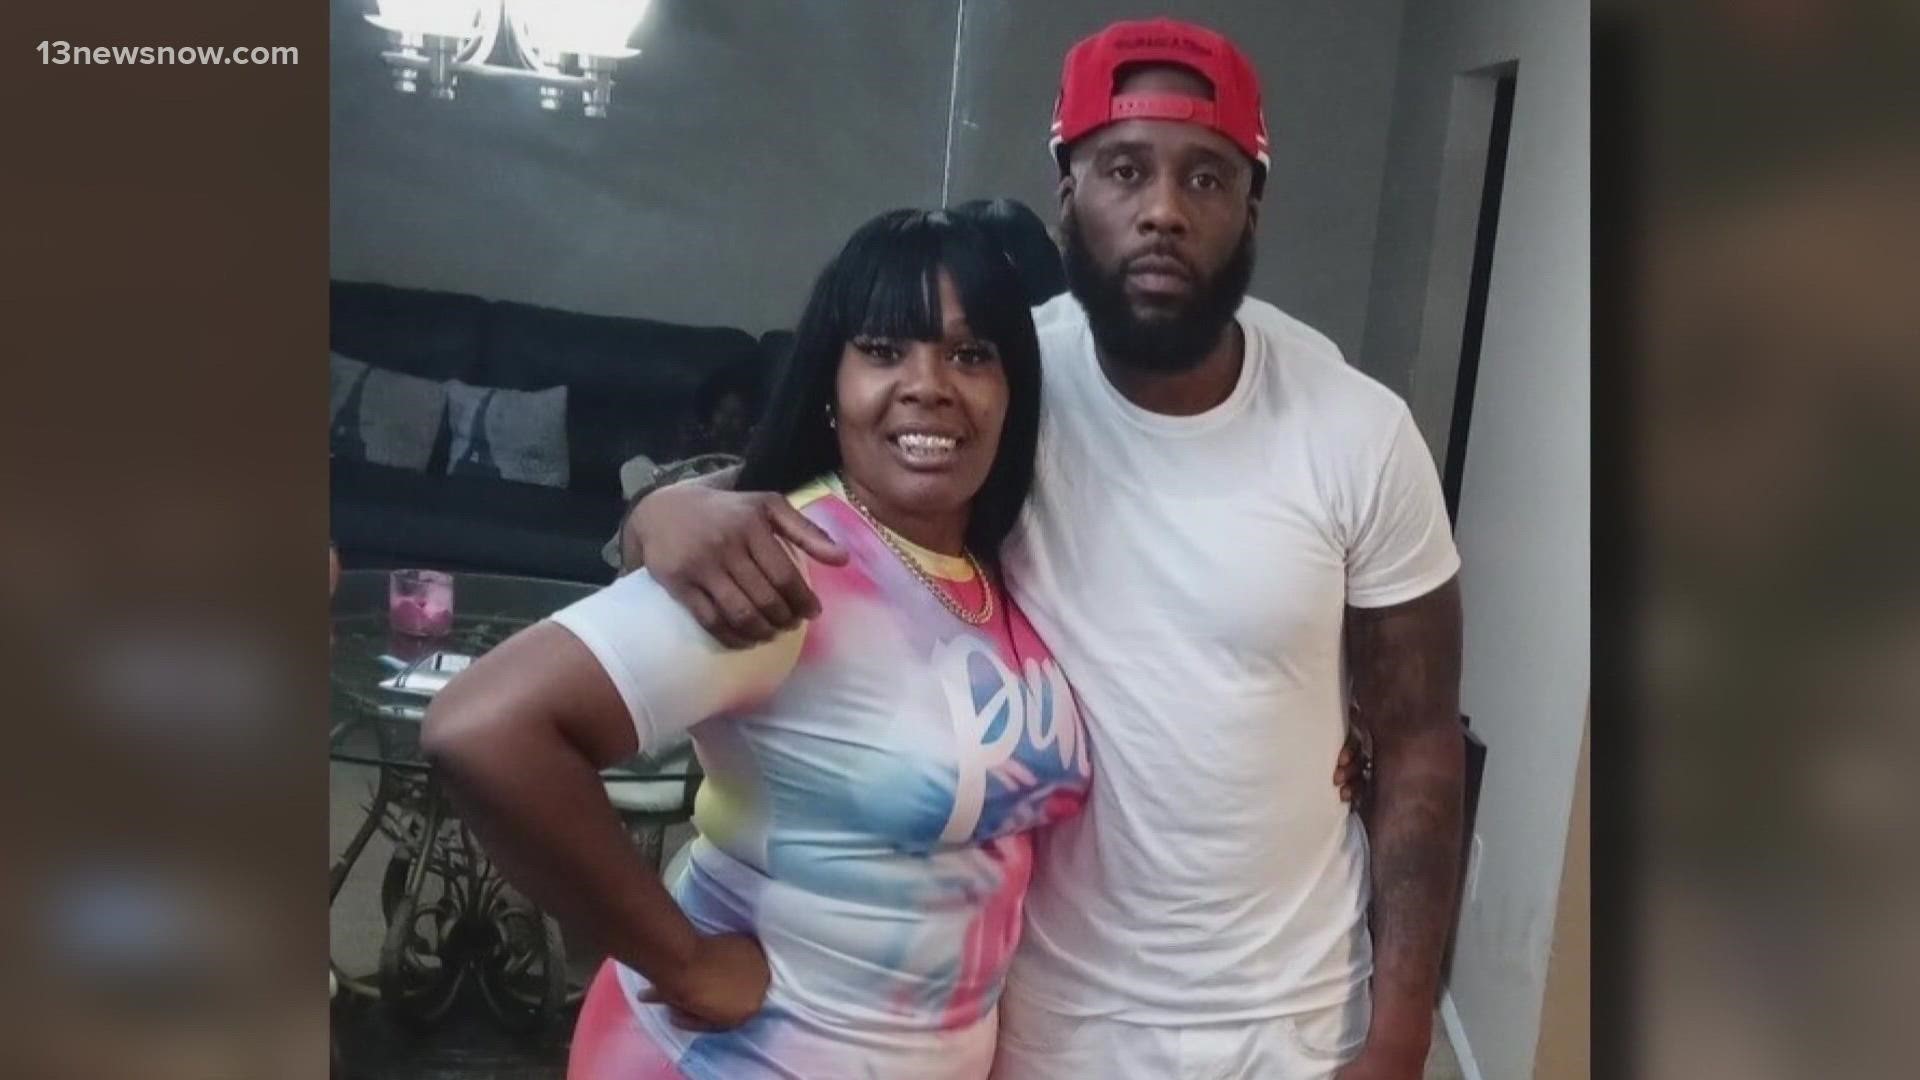 A family told 13News Now that the man who was shot to death was Antonio Beekman. His sister told us they're struggling to cope with what happened.